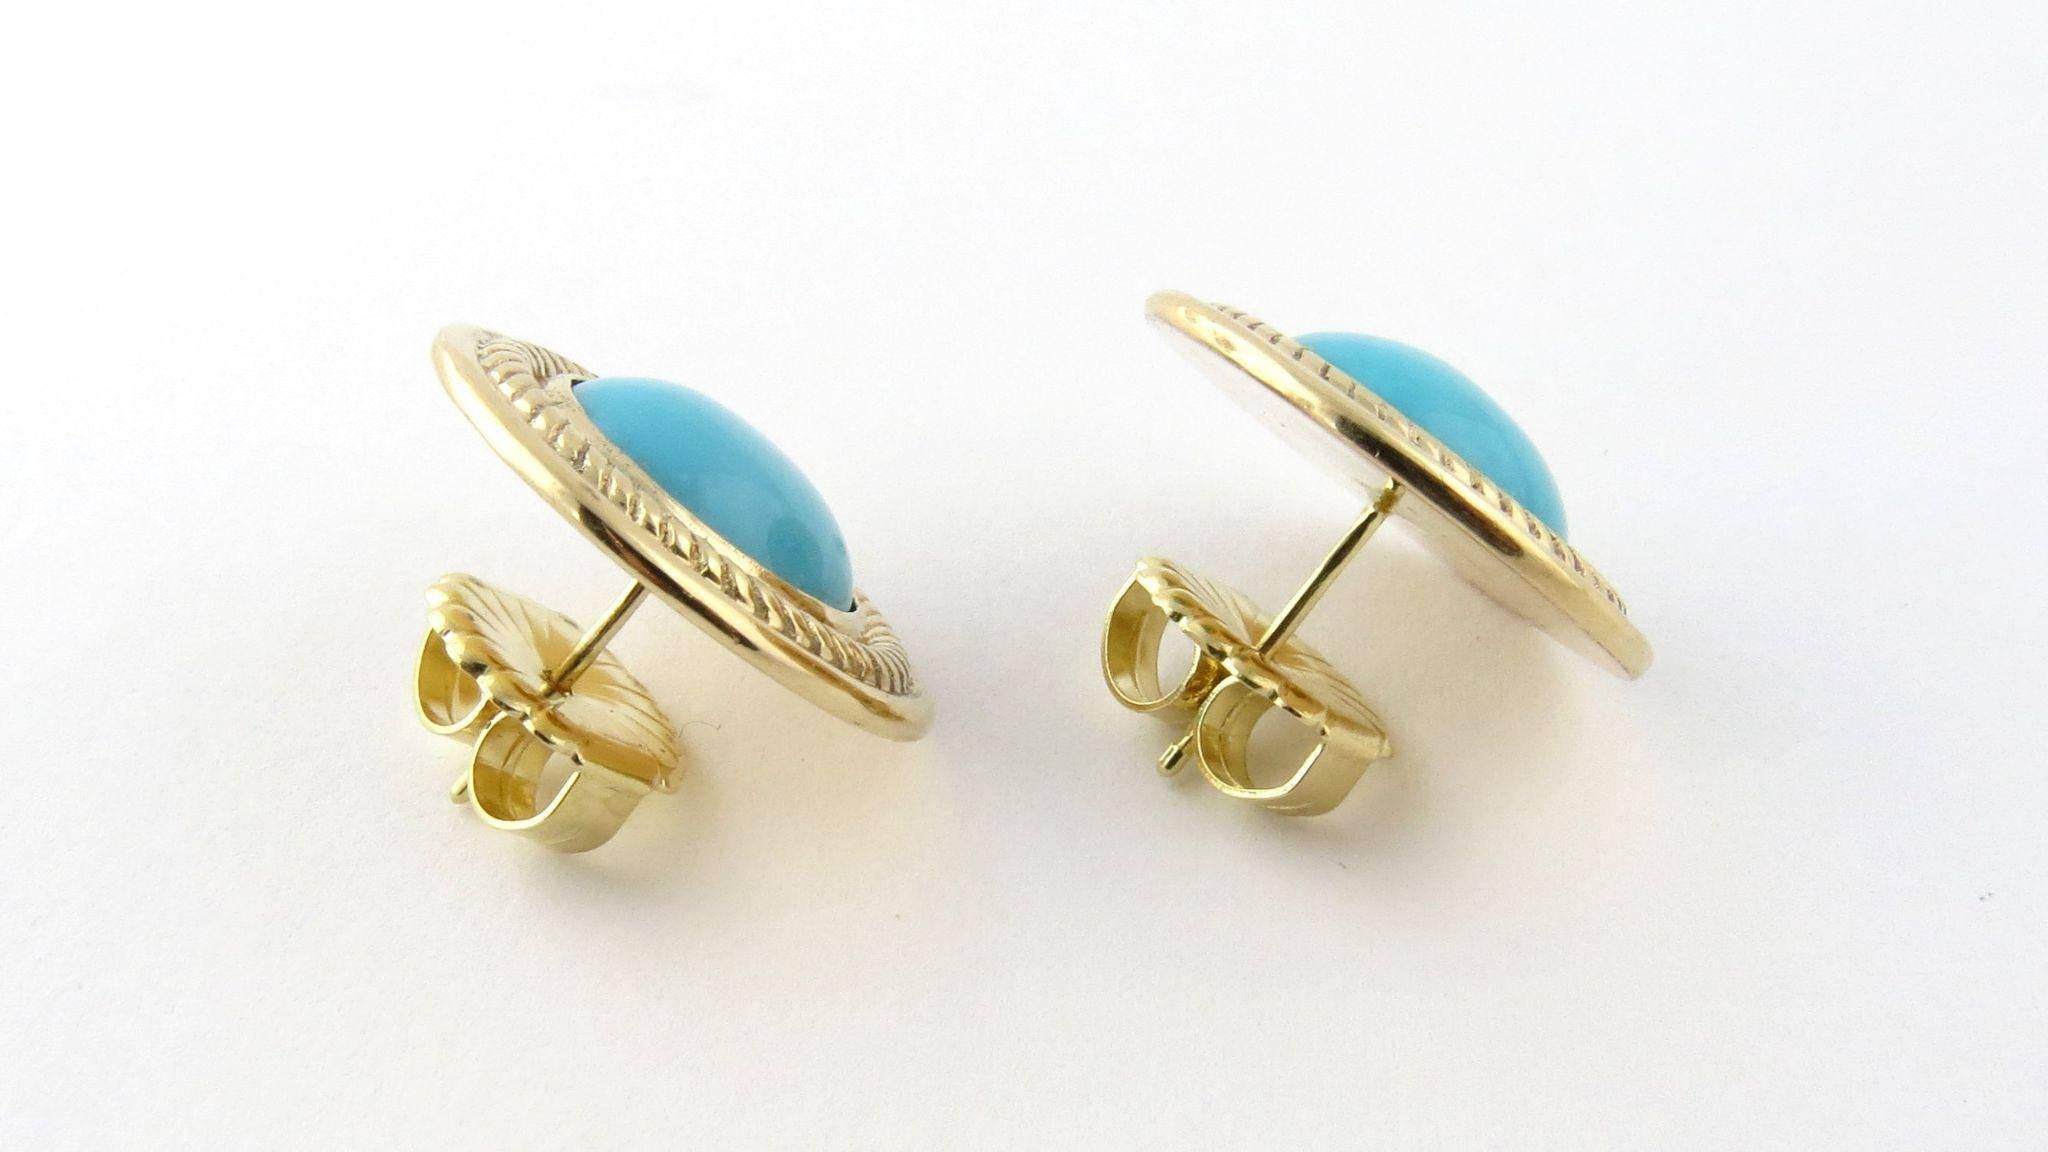 Vintage 14K Yellow Gold and Cabochon Turquoise Button Earrings 

These button style earrings are set with a beautiful robin's egg color turquoise stone. 

A rope of yellow gold surrounds the center stone. 

Each earring is 18 mm in diameter.